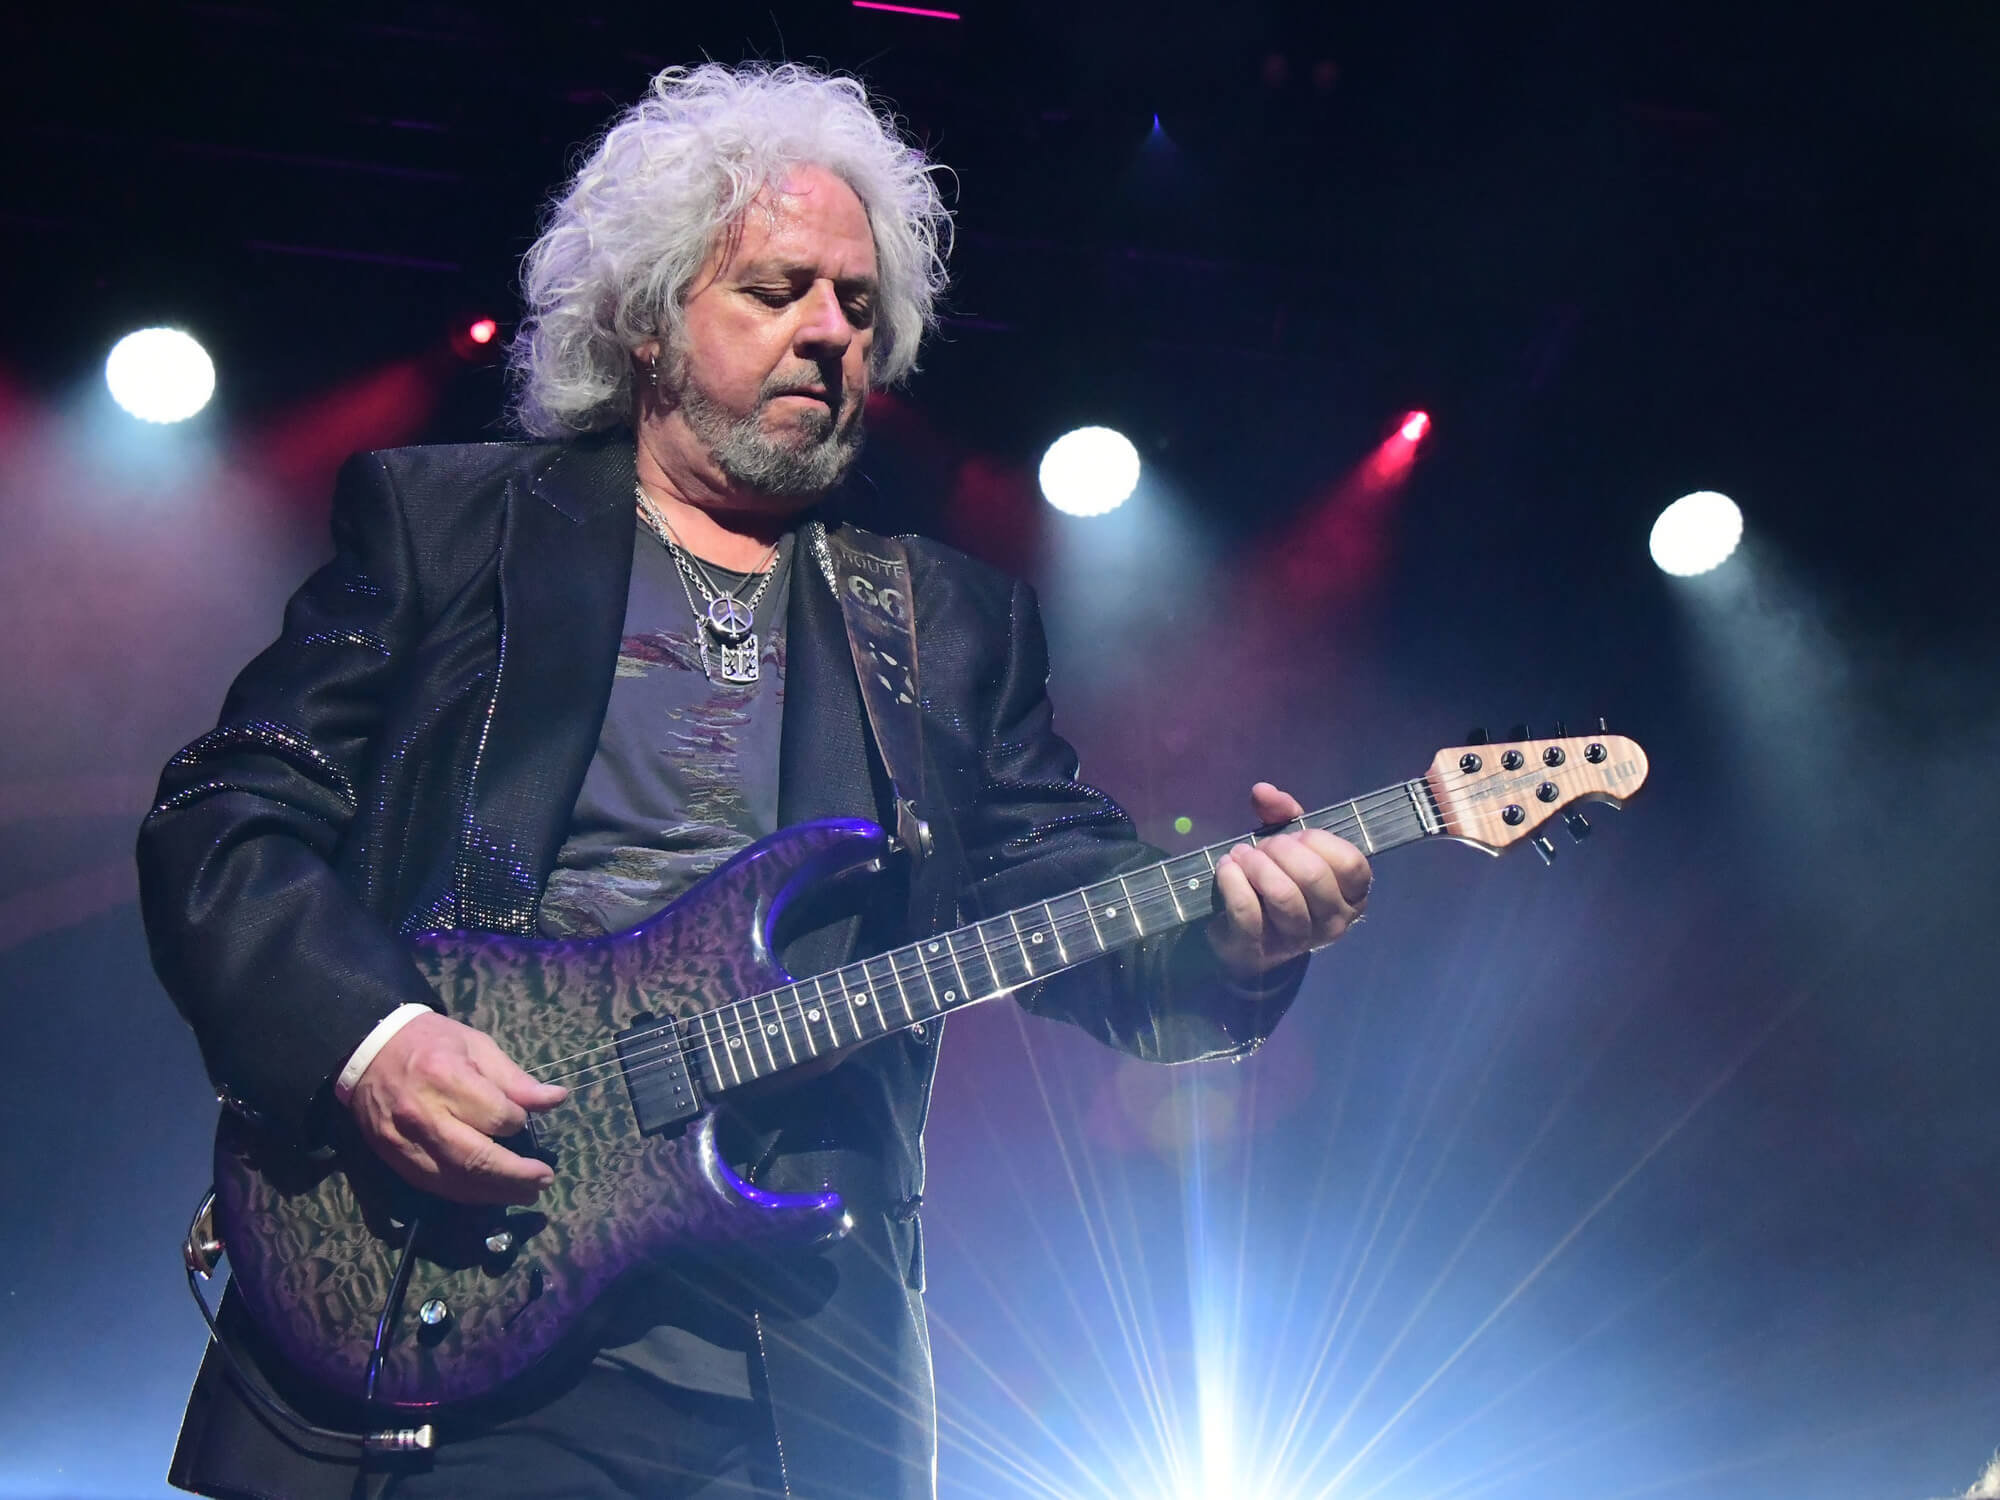 Steve Lukather playing guitar live